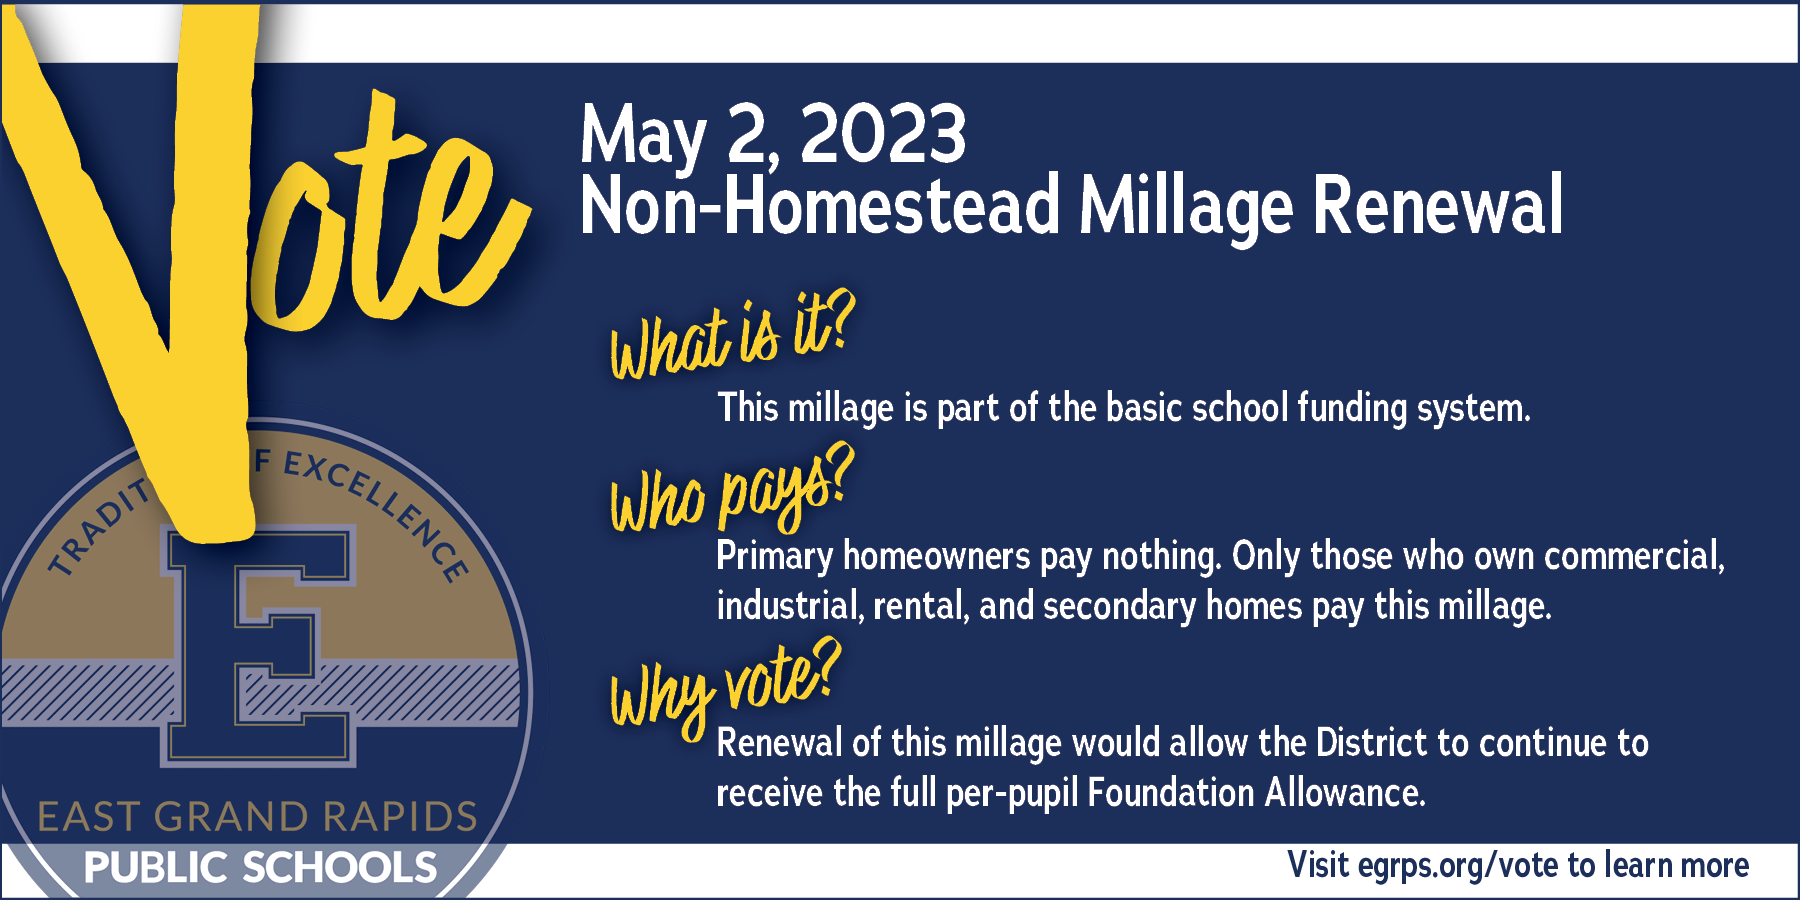 May 2, 2023 Non-Homestead Millage Renewal - What is it? This millage is part of the basic school funding system. Who pays? Primary homeowners pay nothing. Only those who own commercial, industrial, rental, and secondary homes pay this millage. Why vote? Renewal of this millage would allow the District to continue to receive the full per-pupil Foundation Allowance.